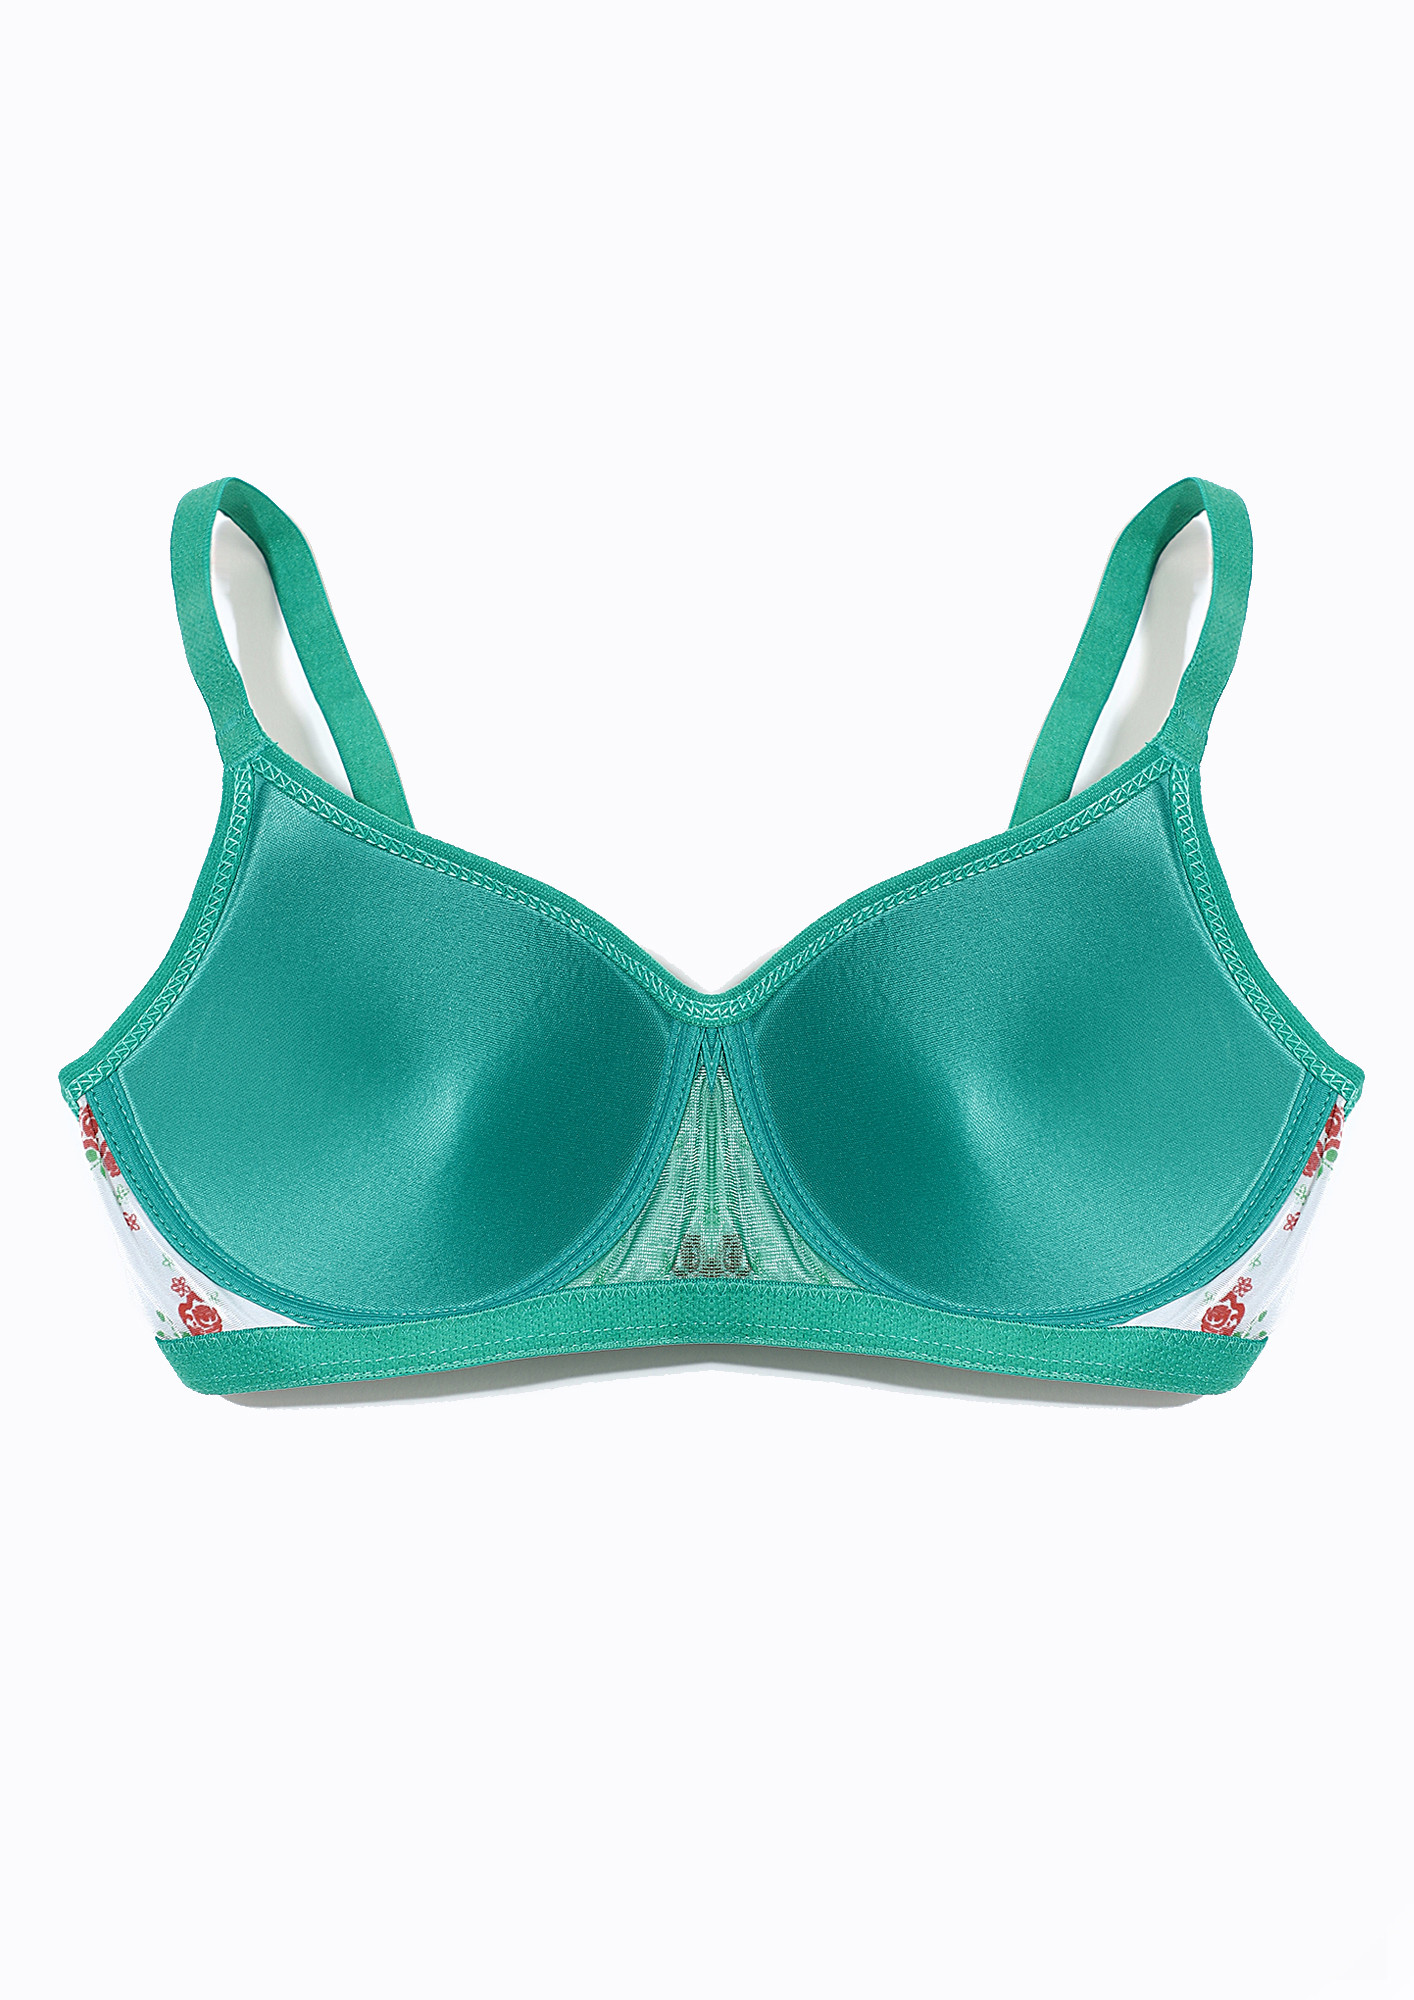 Jockey 36b Teal T Shirt Bra - Get Best Price from Manufacturers & Suppliers  in India